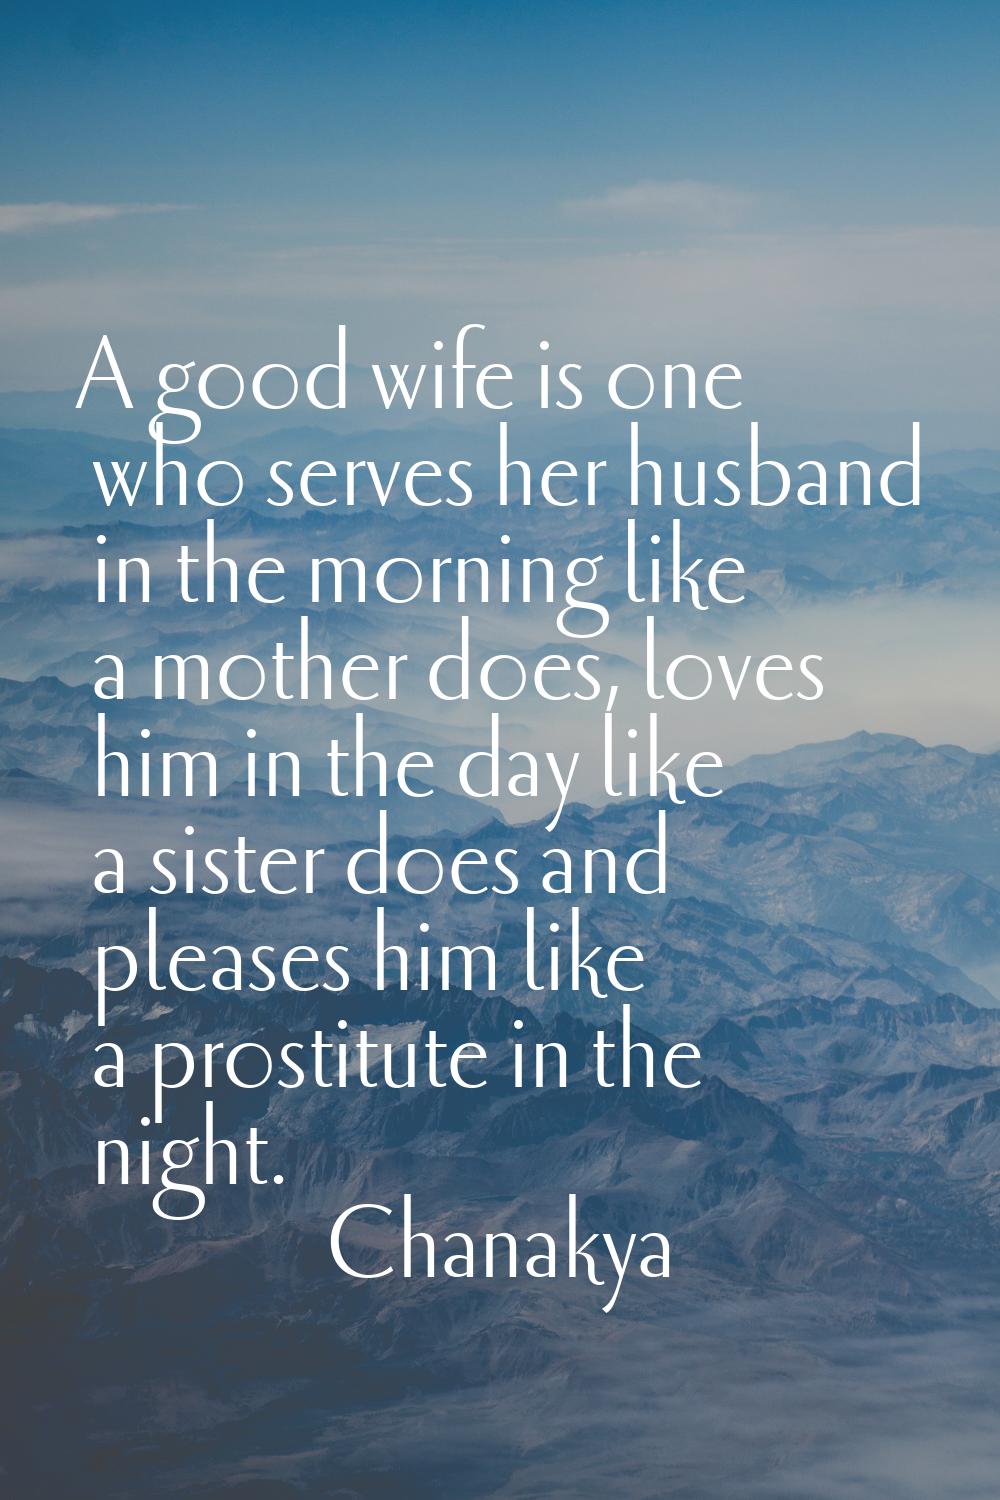 A good wife is one who serves her husband in the morning like a mother does, loves him in the day l